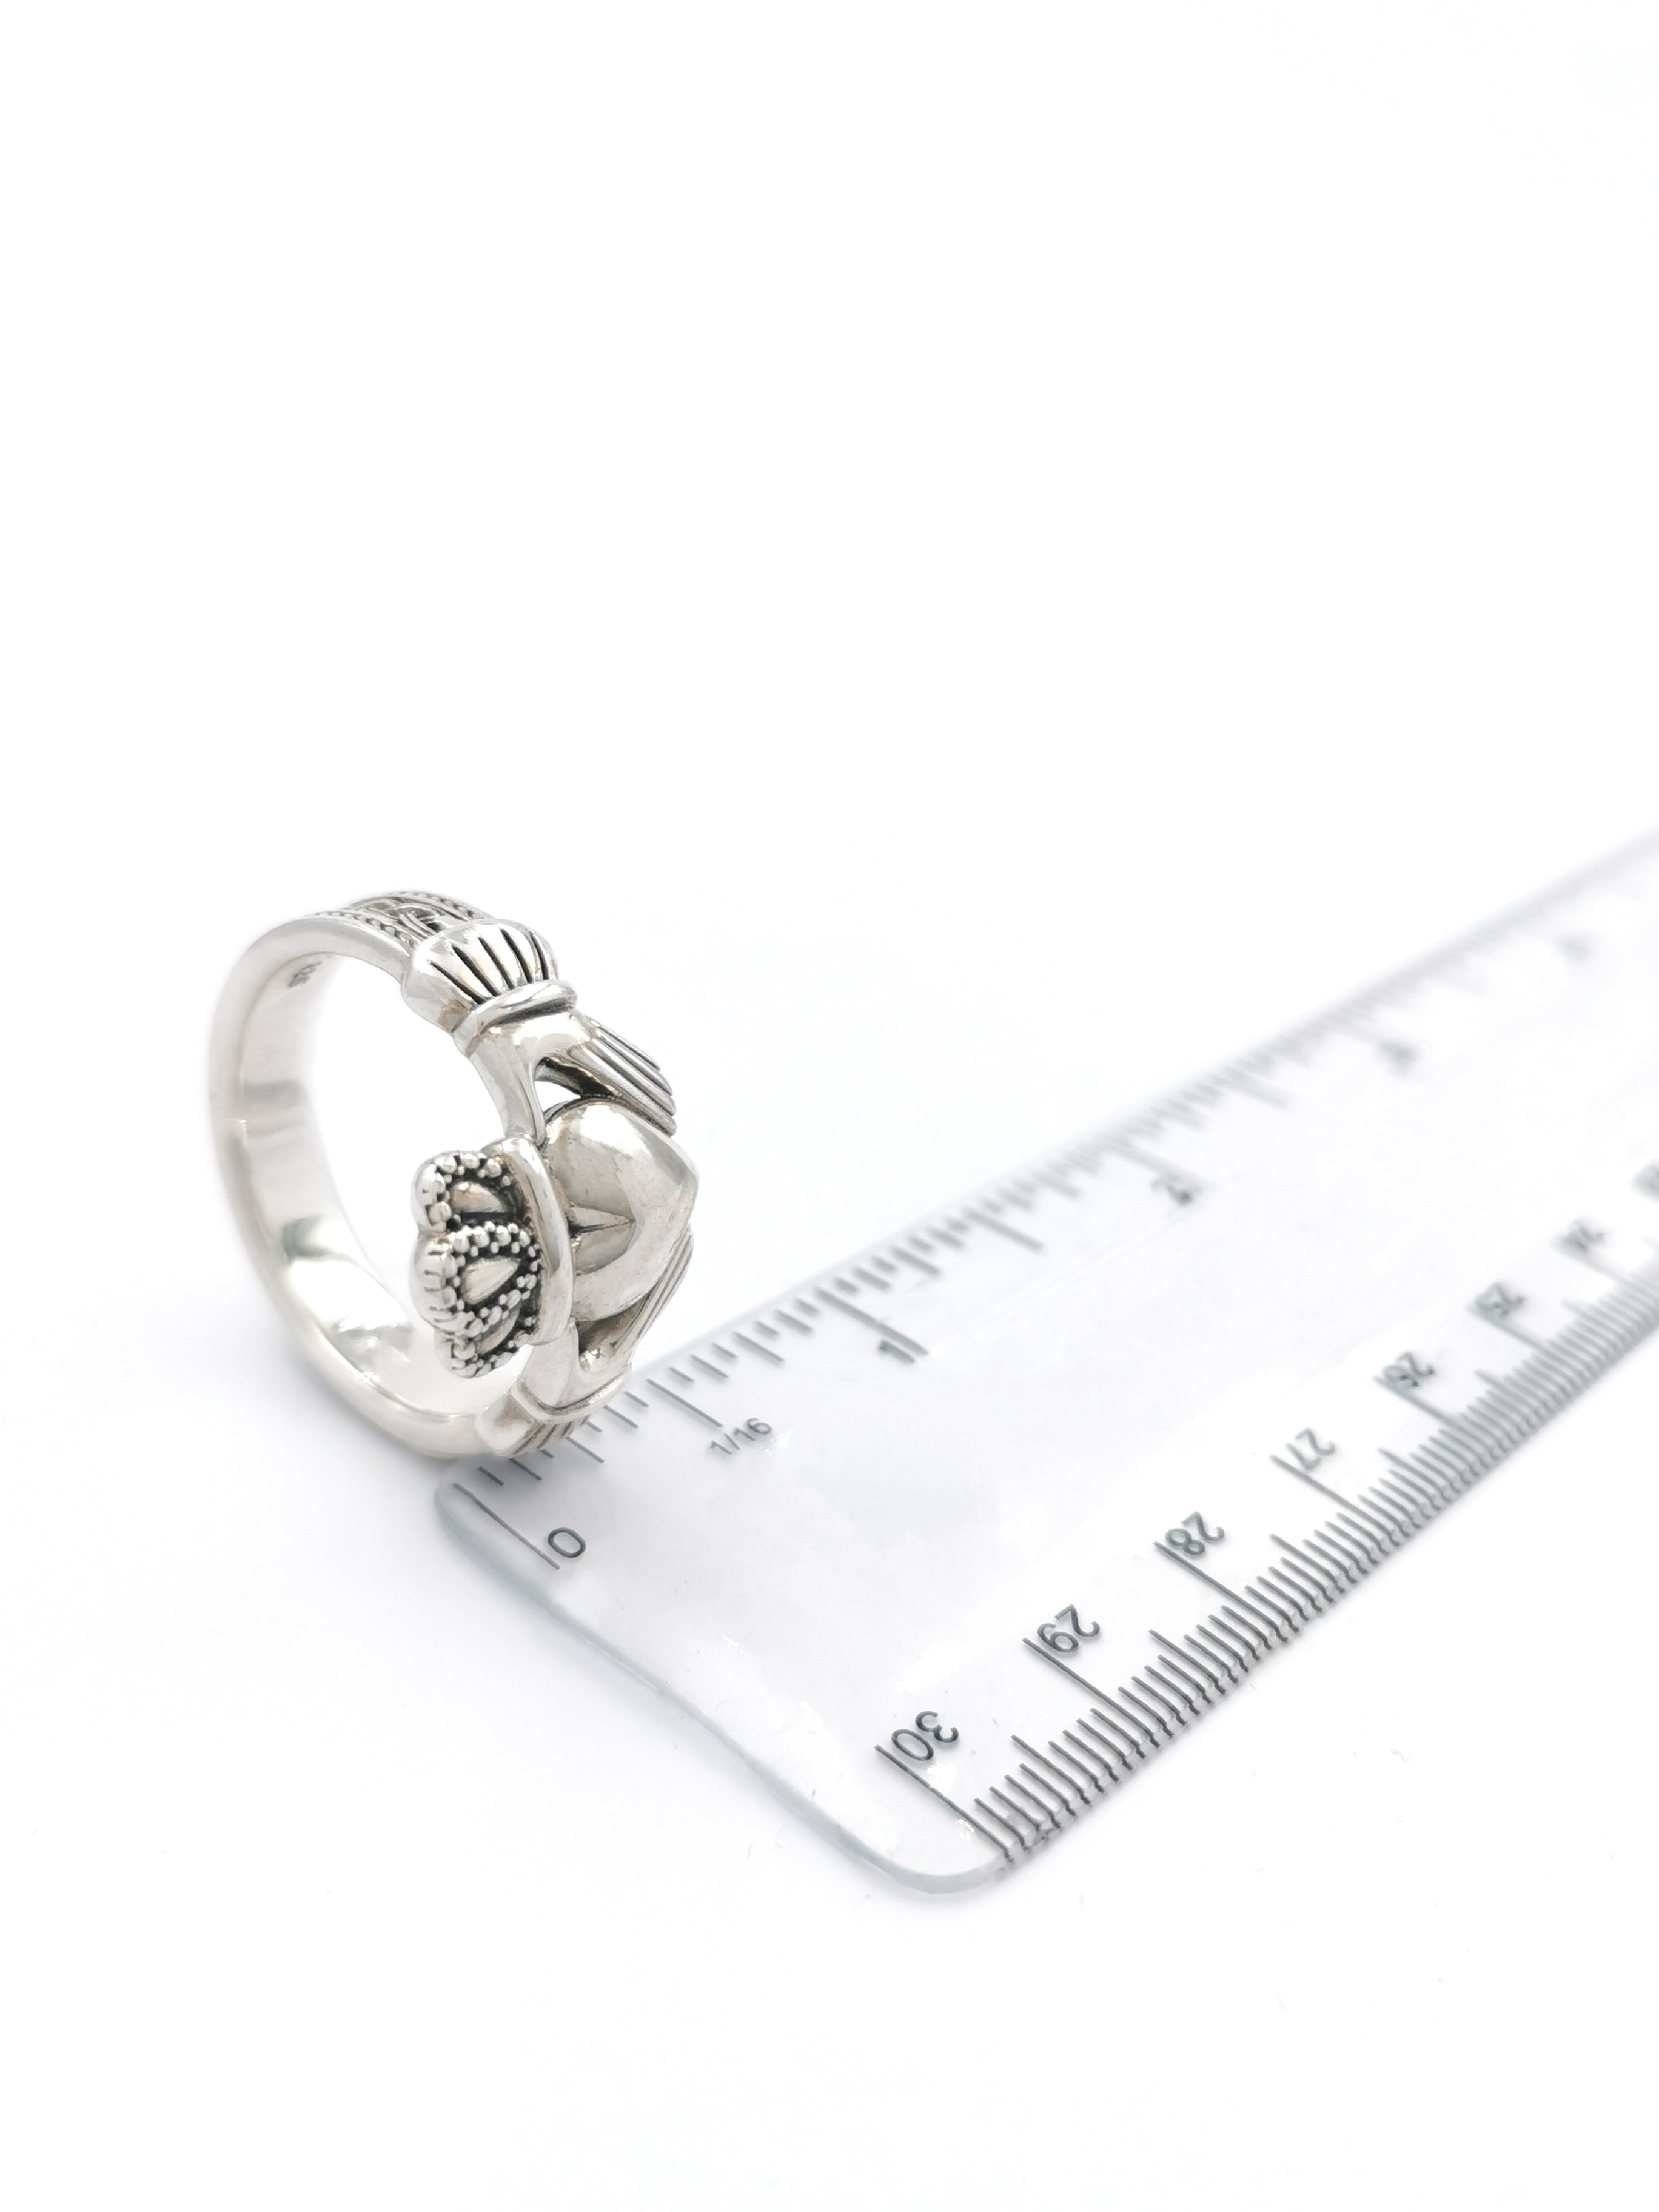 TWO HANDS Friendship Ring, Sterling Silver and With Your Choice of Stone.  Fede Ring, Gimmel Ring - Etsy | Friendship rings, Amazing jewelry, Sterling  silver rings